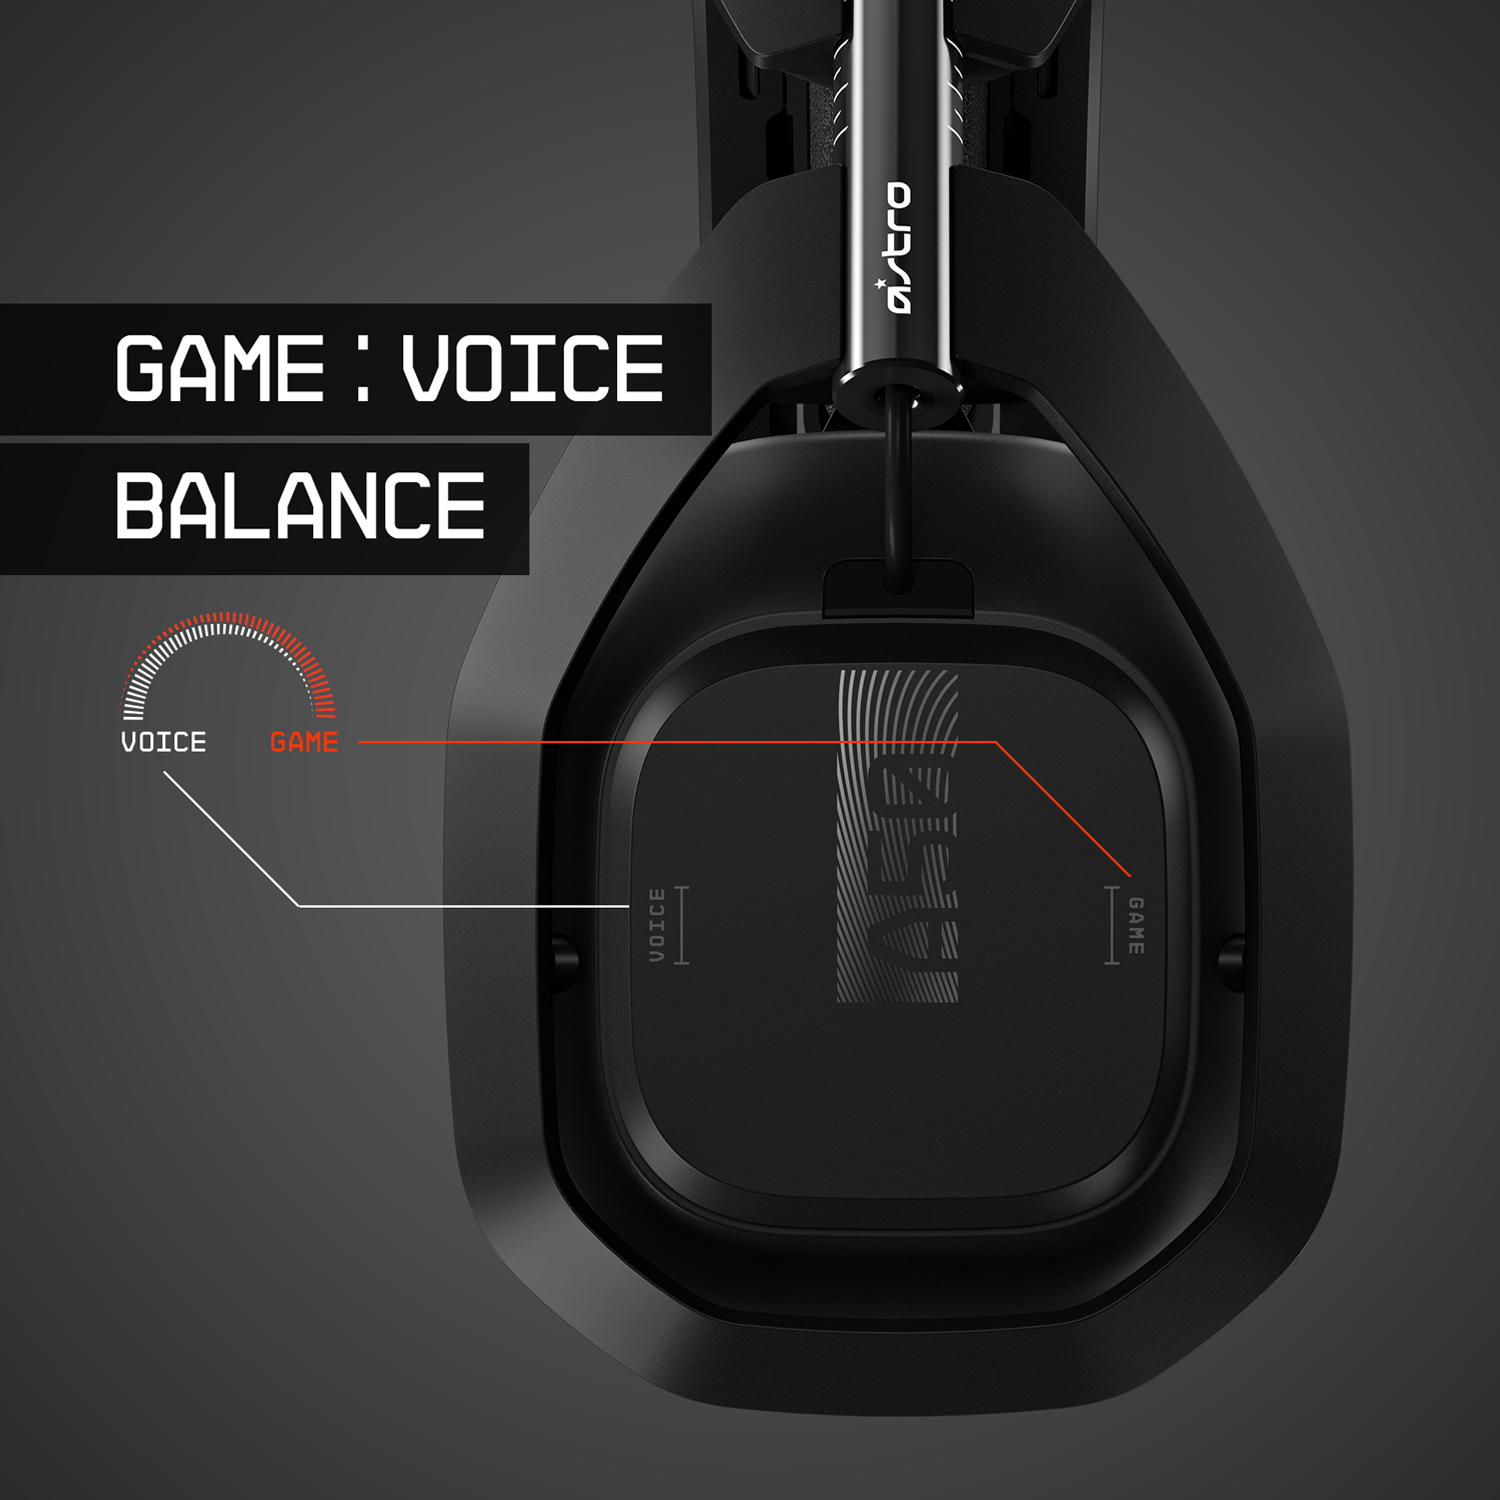 astro a50 without base station